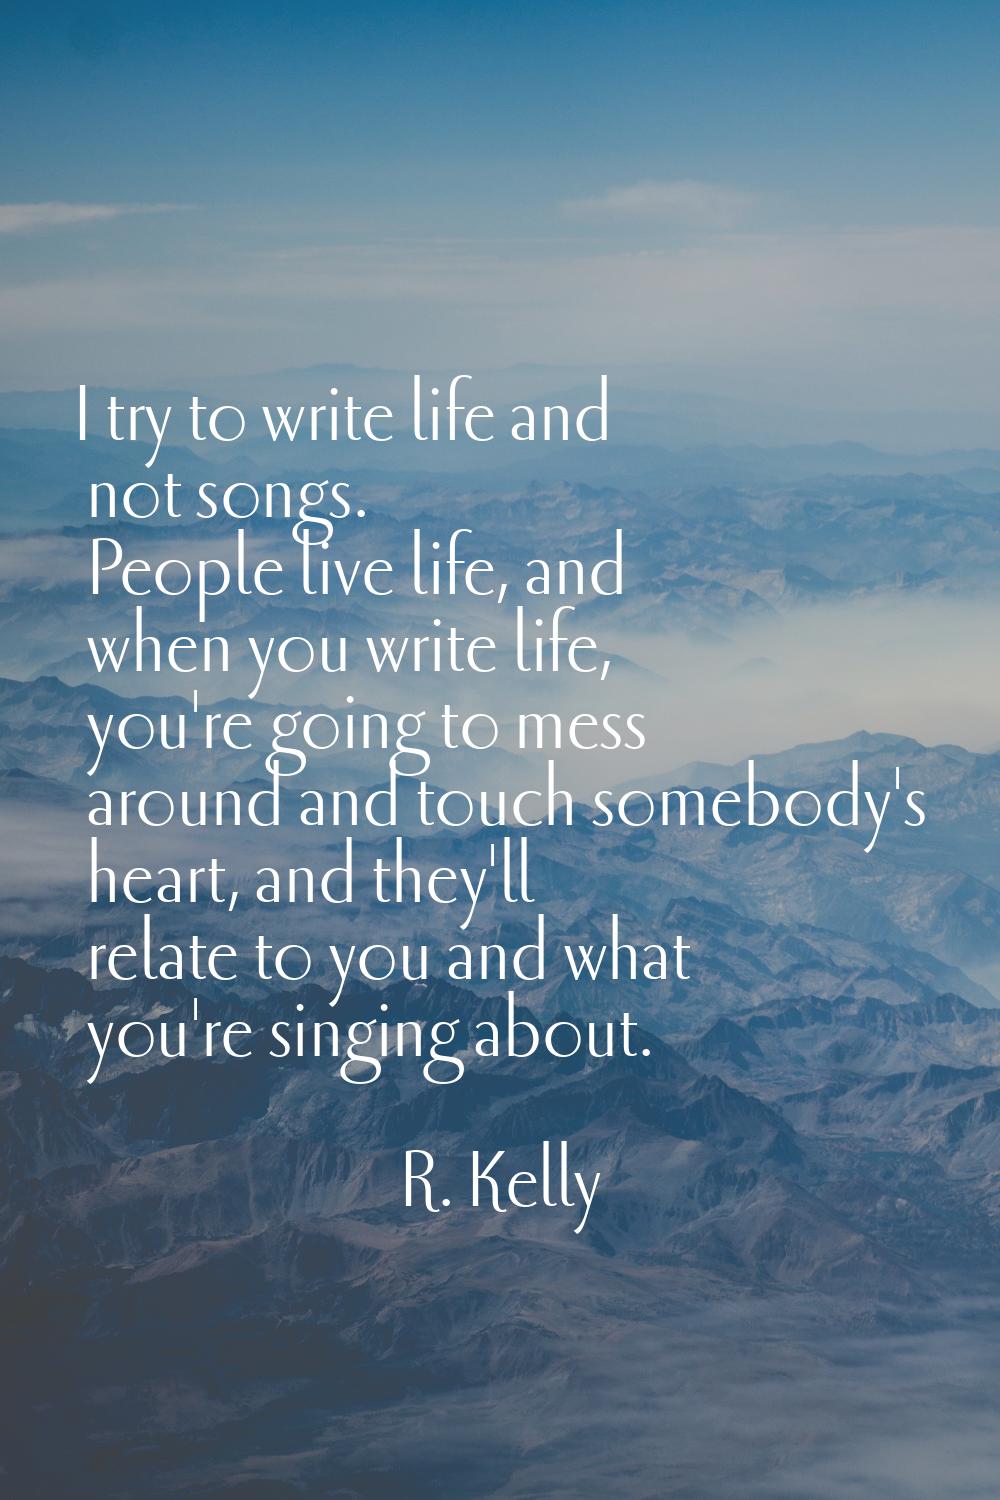 I try to write life and not songs. People live life, and when you write life, you're going to mess 